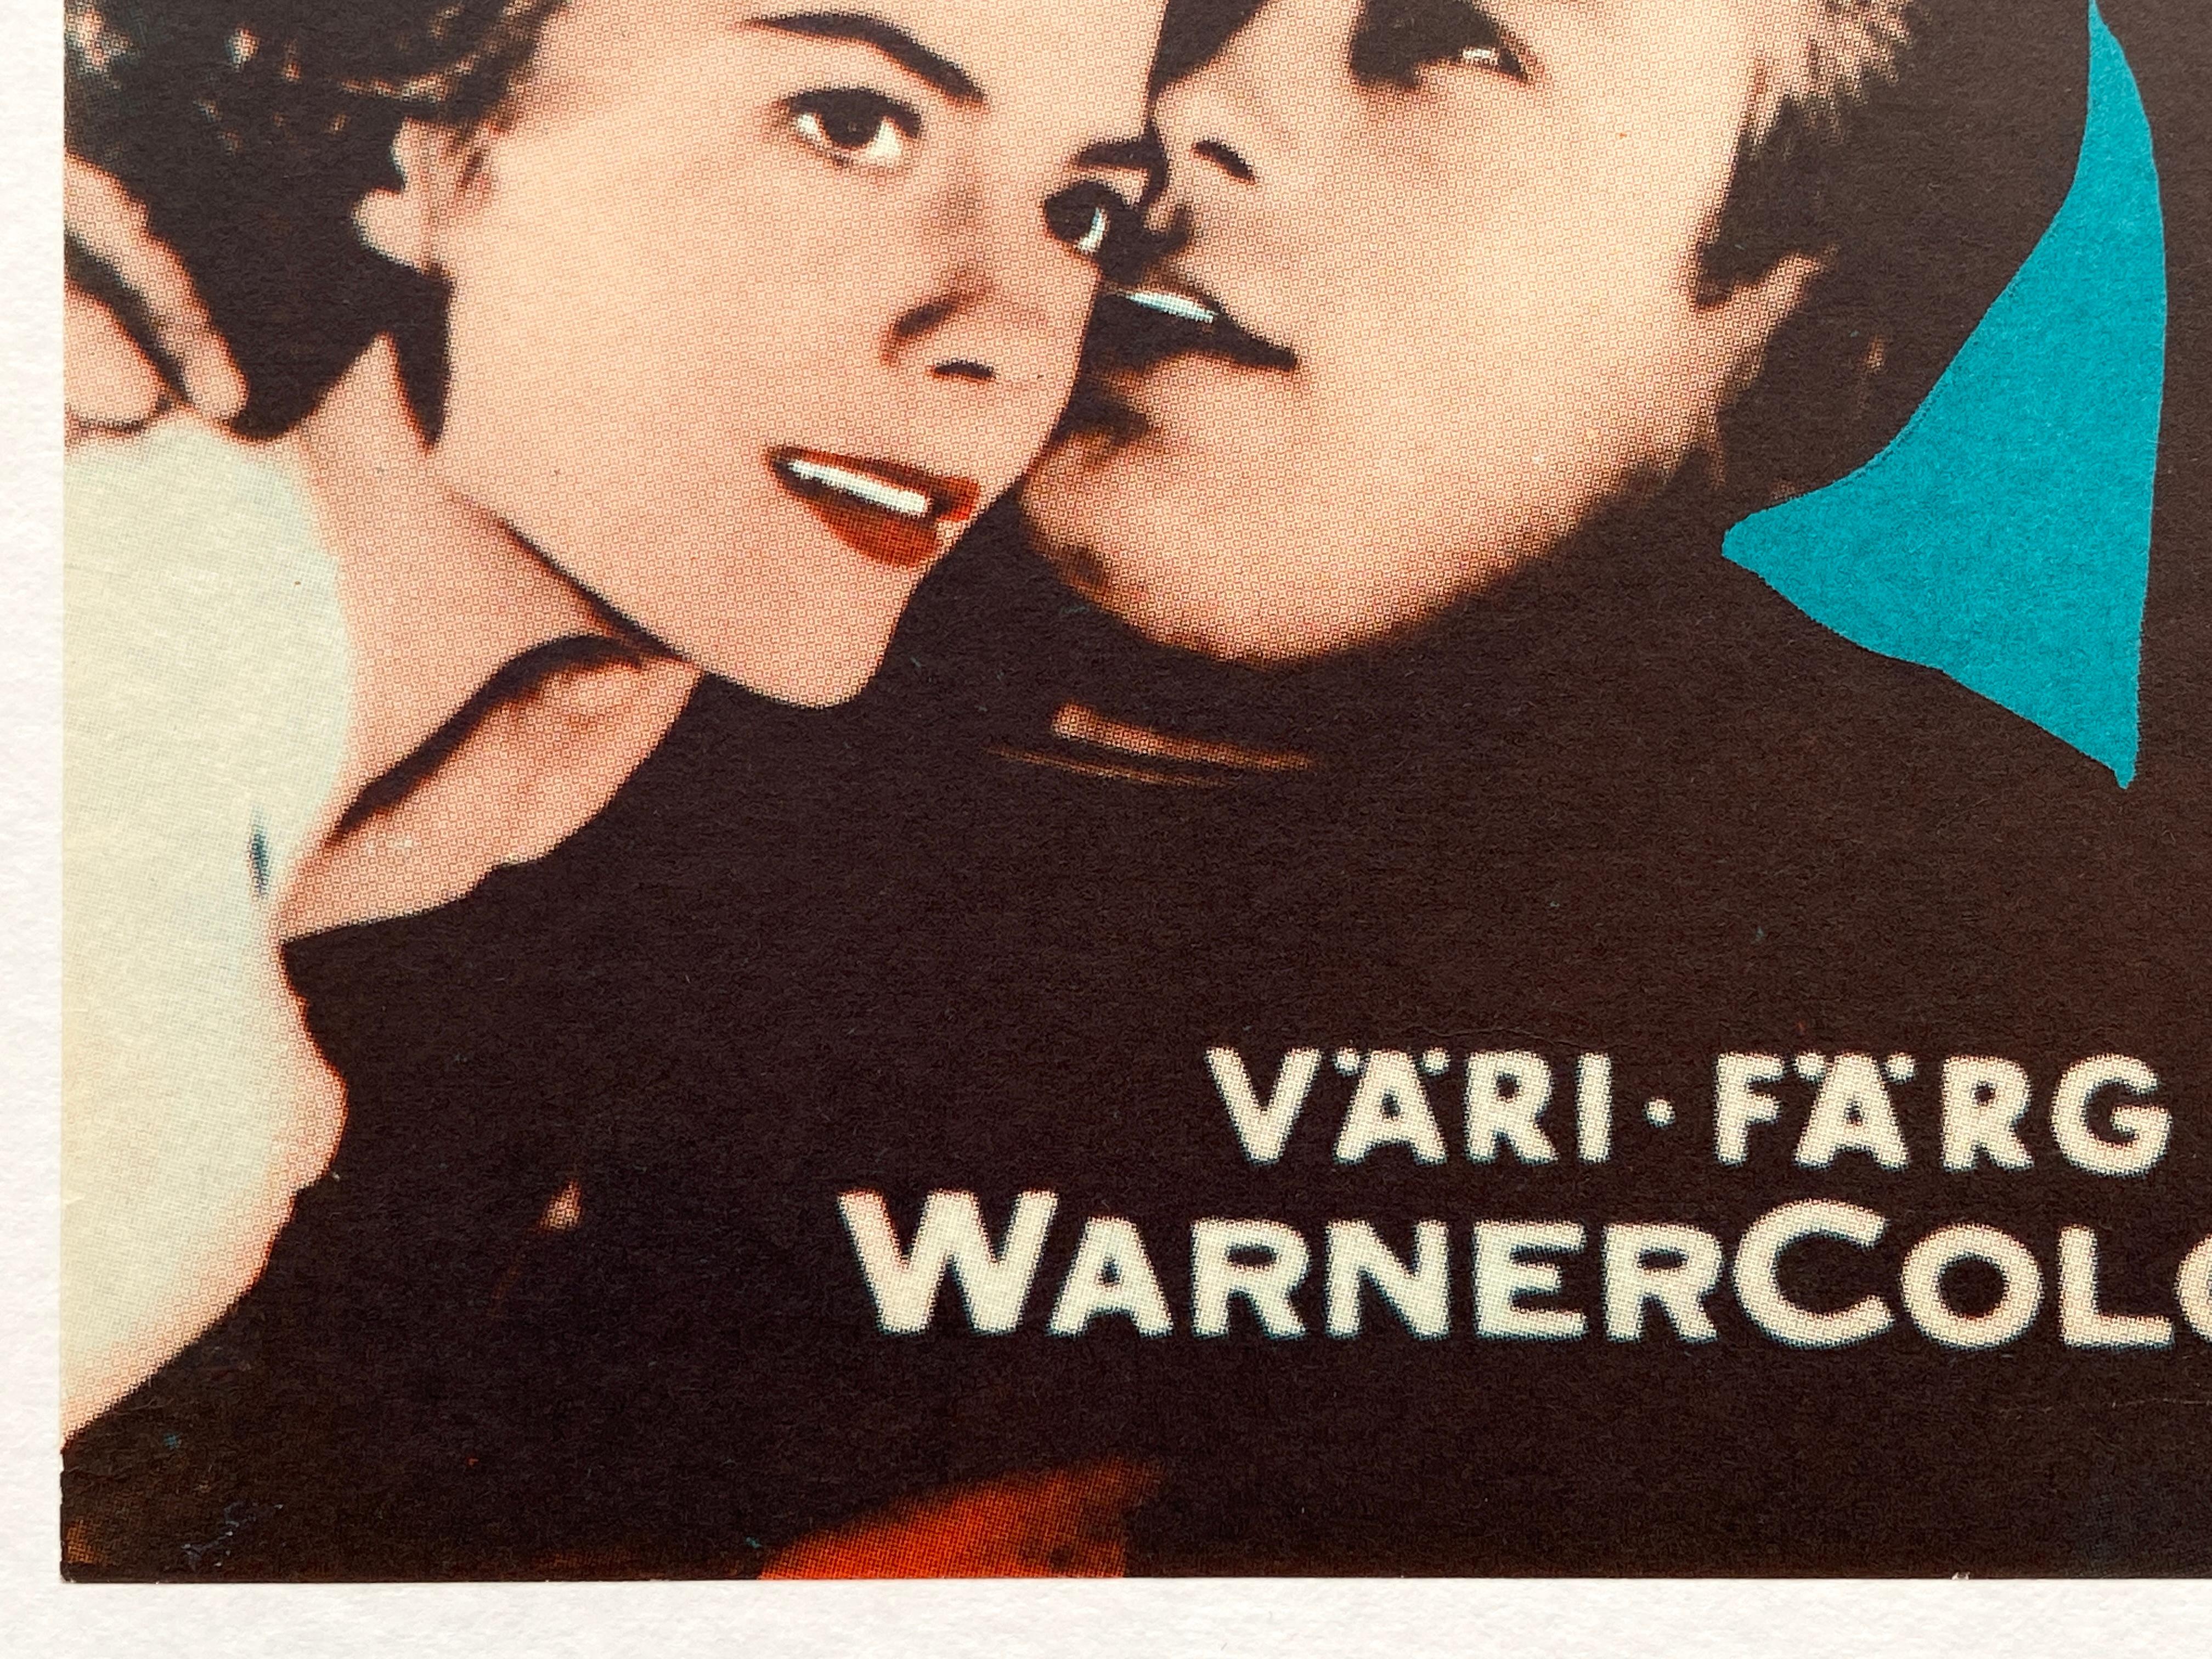 Other James Dean 'Rebel Without a Cause' Original Vintage Movie Poster, Finnish, 1956 For Sale